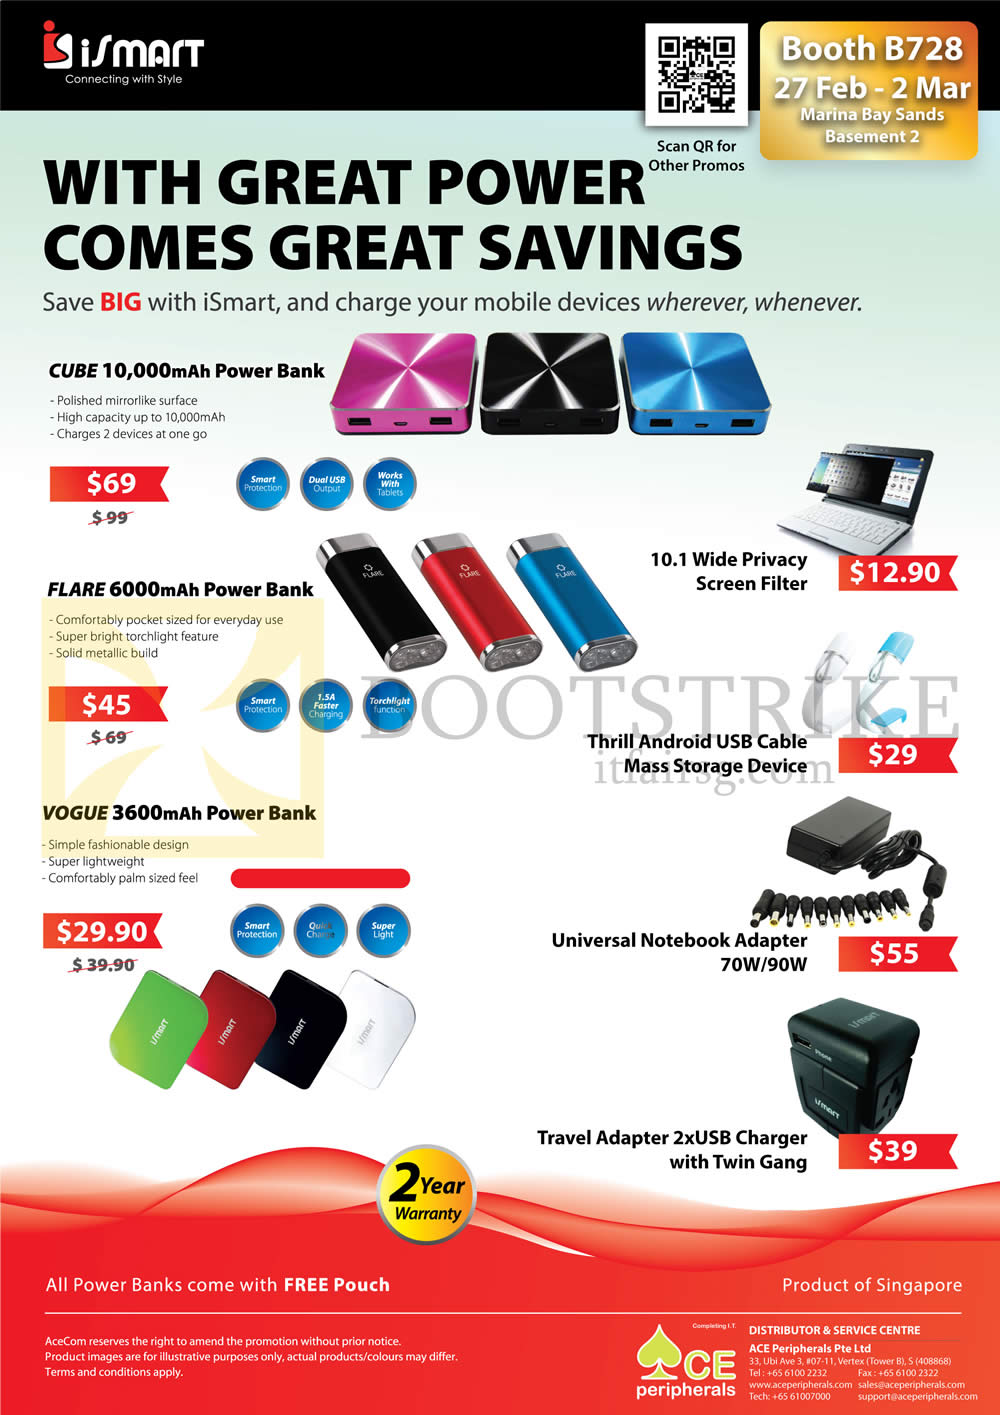 IT SHOW 2014 price list image brochure of Ace Peripherals ISmart Power Bank, Cube, Flare, Vogue